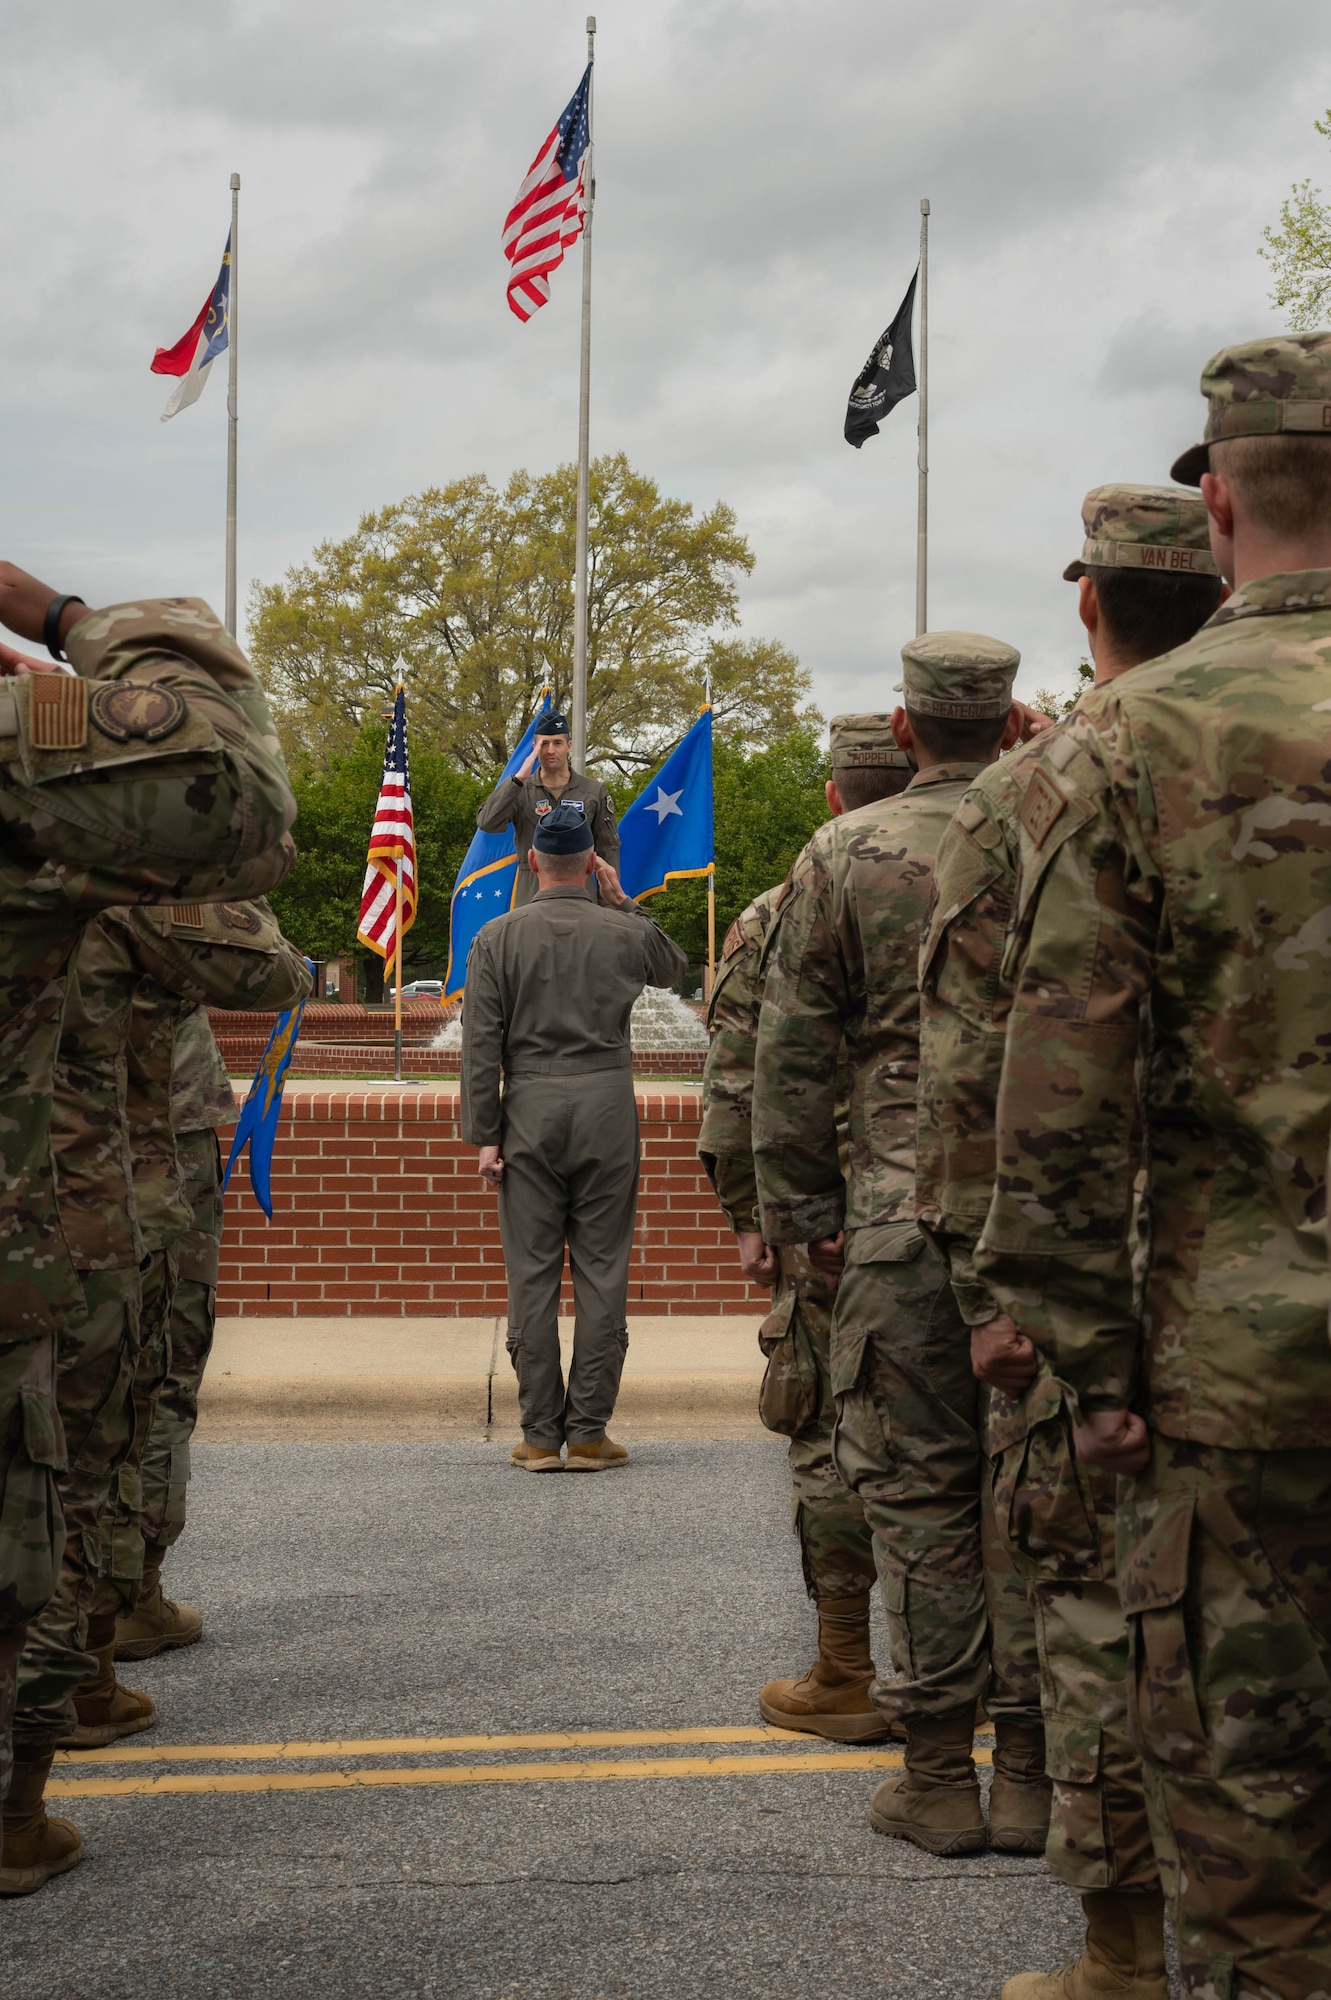 Col. Morgan Lohse, 4th Fighter Wing in-coming commander, receives  his first salute as commander of the 4 FW during the change of command ceremony at Seymour Johnson Air Force Base, North Carolina, March 22, 2024. Change of command ceremonies are a long-standing military tradition that symbolizes the official transfer of power and duties from the departing commander to the incoming commander. (U.S Air Force photo by Airman 1st Class Rebecca Sirimarco-Lang)